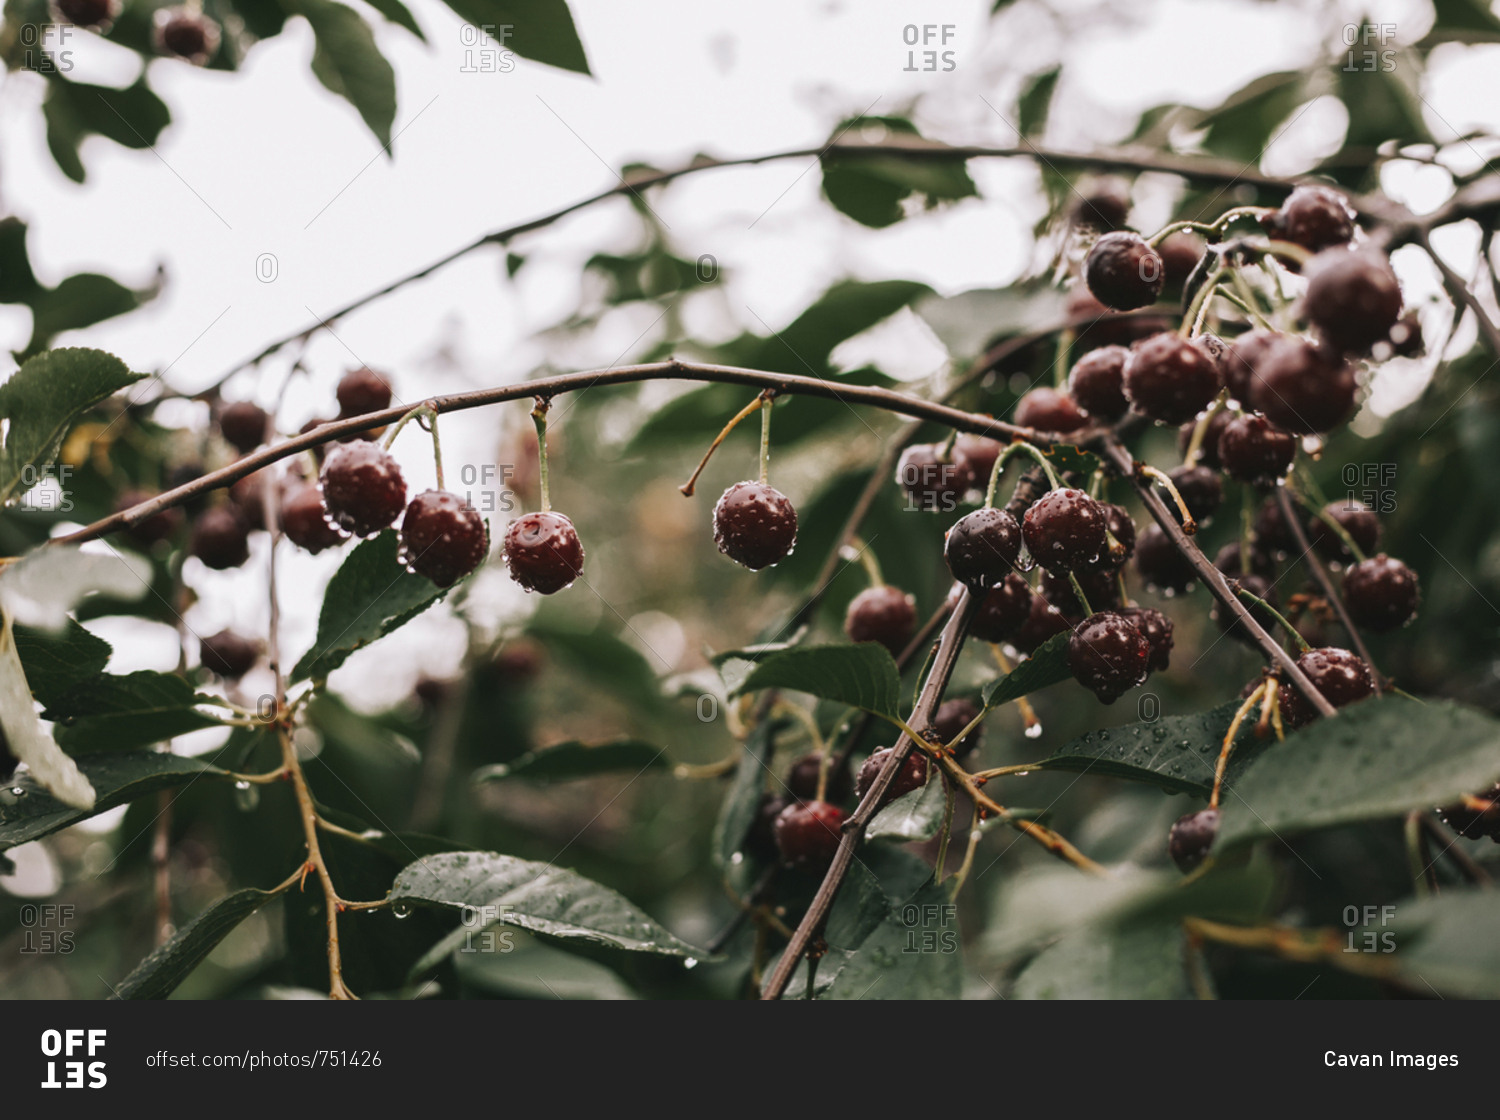 Close-up of wet cherries growing on branches during rainy season